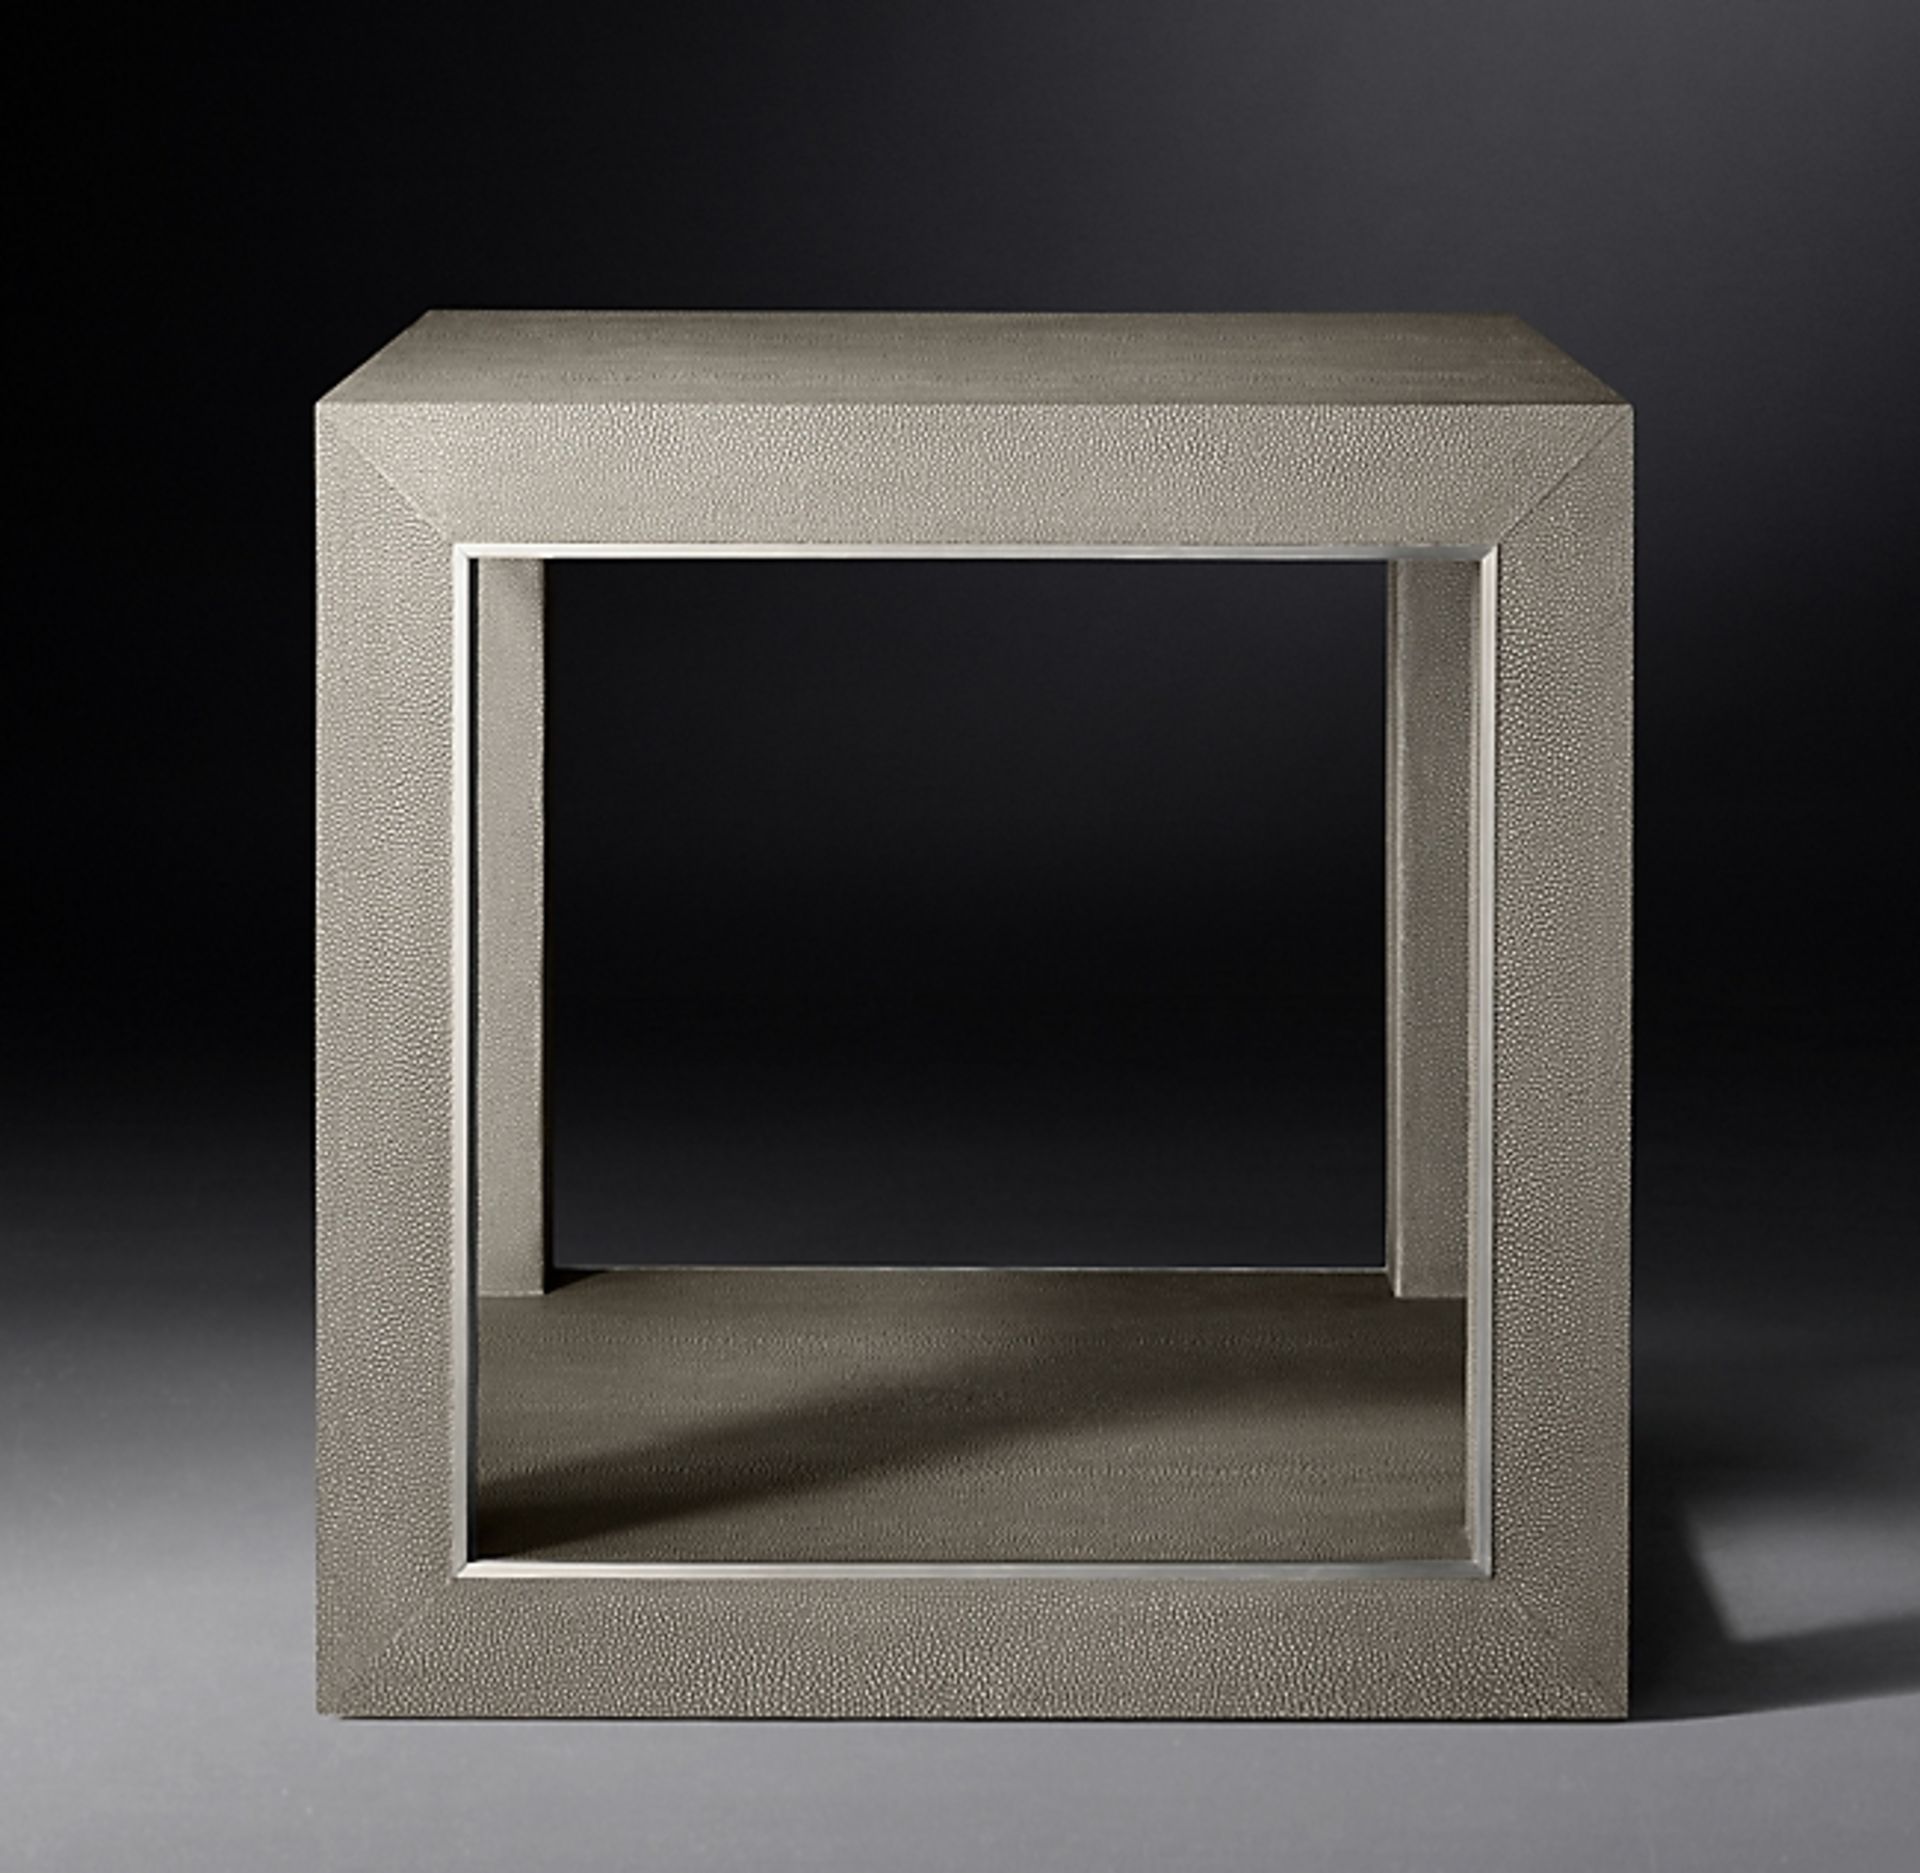 Cela Grey Shagreen 22 Square Side Table Crafted Of Shagreen Embossed Leather With The Texture